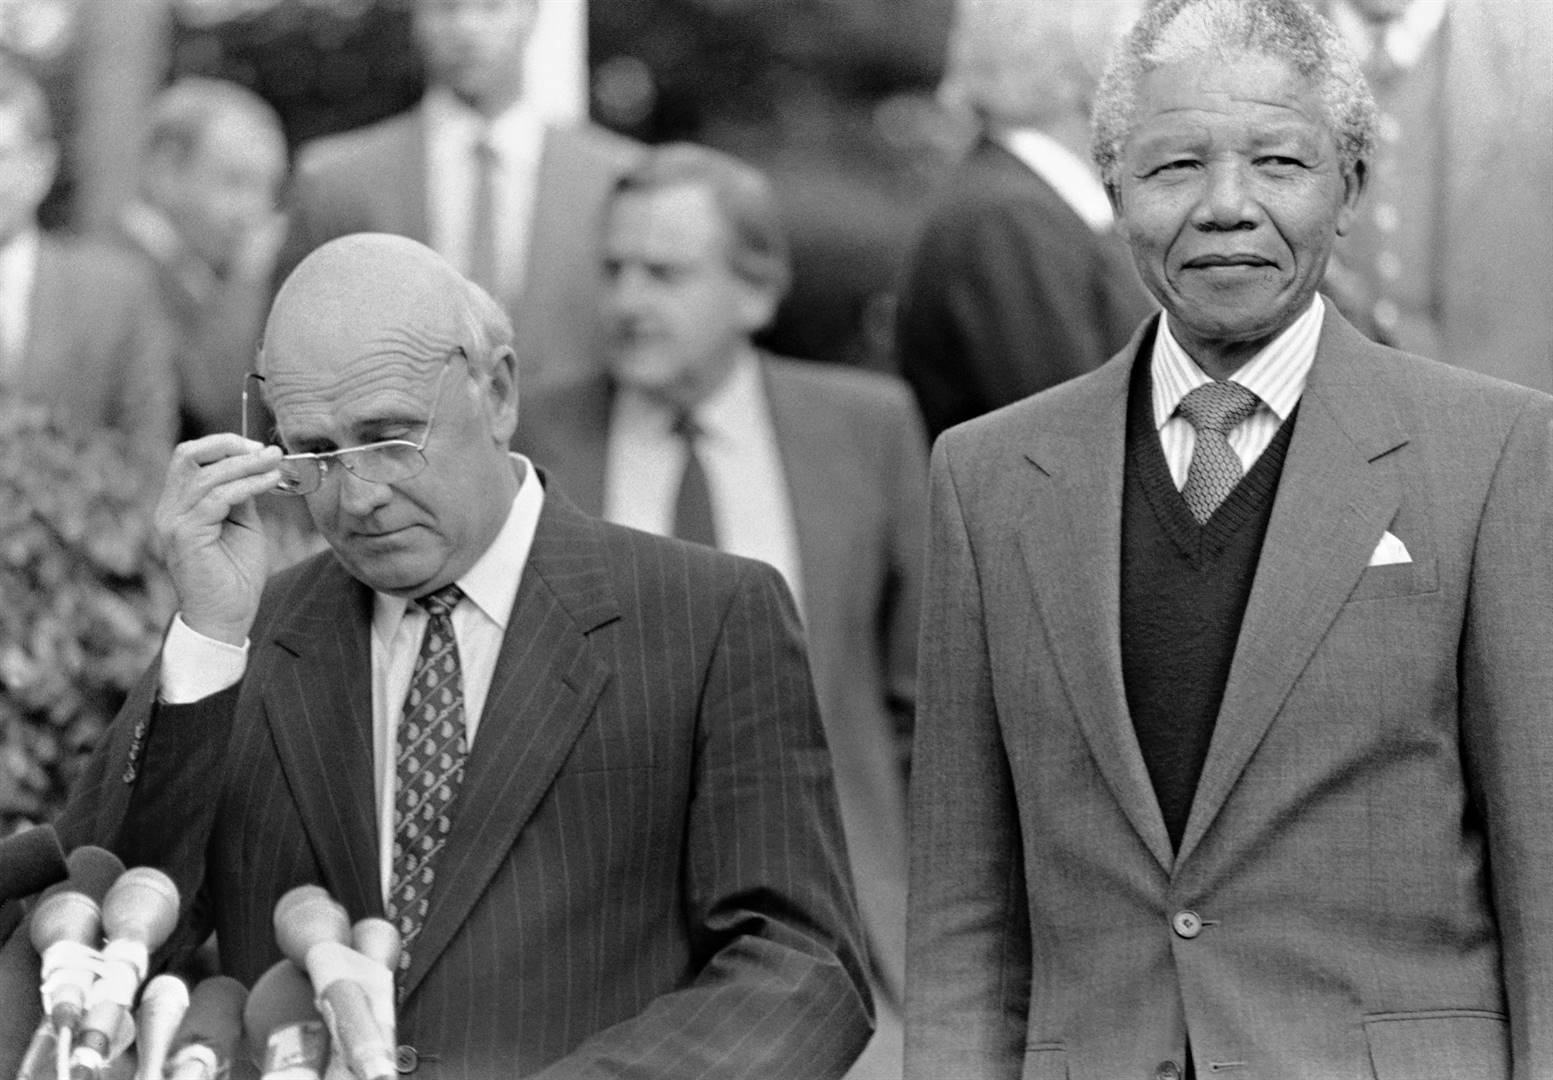 Former President  Nelson Mandela at a media conference with apartheid President FW de Klerk in Johannesburg in 1990. Photo: Gallo Images via Getty Images